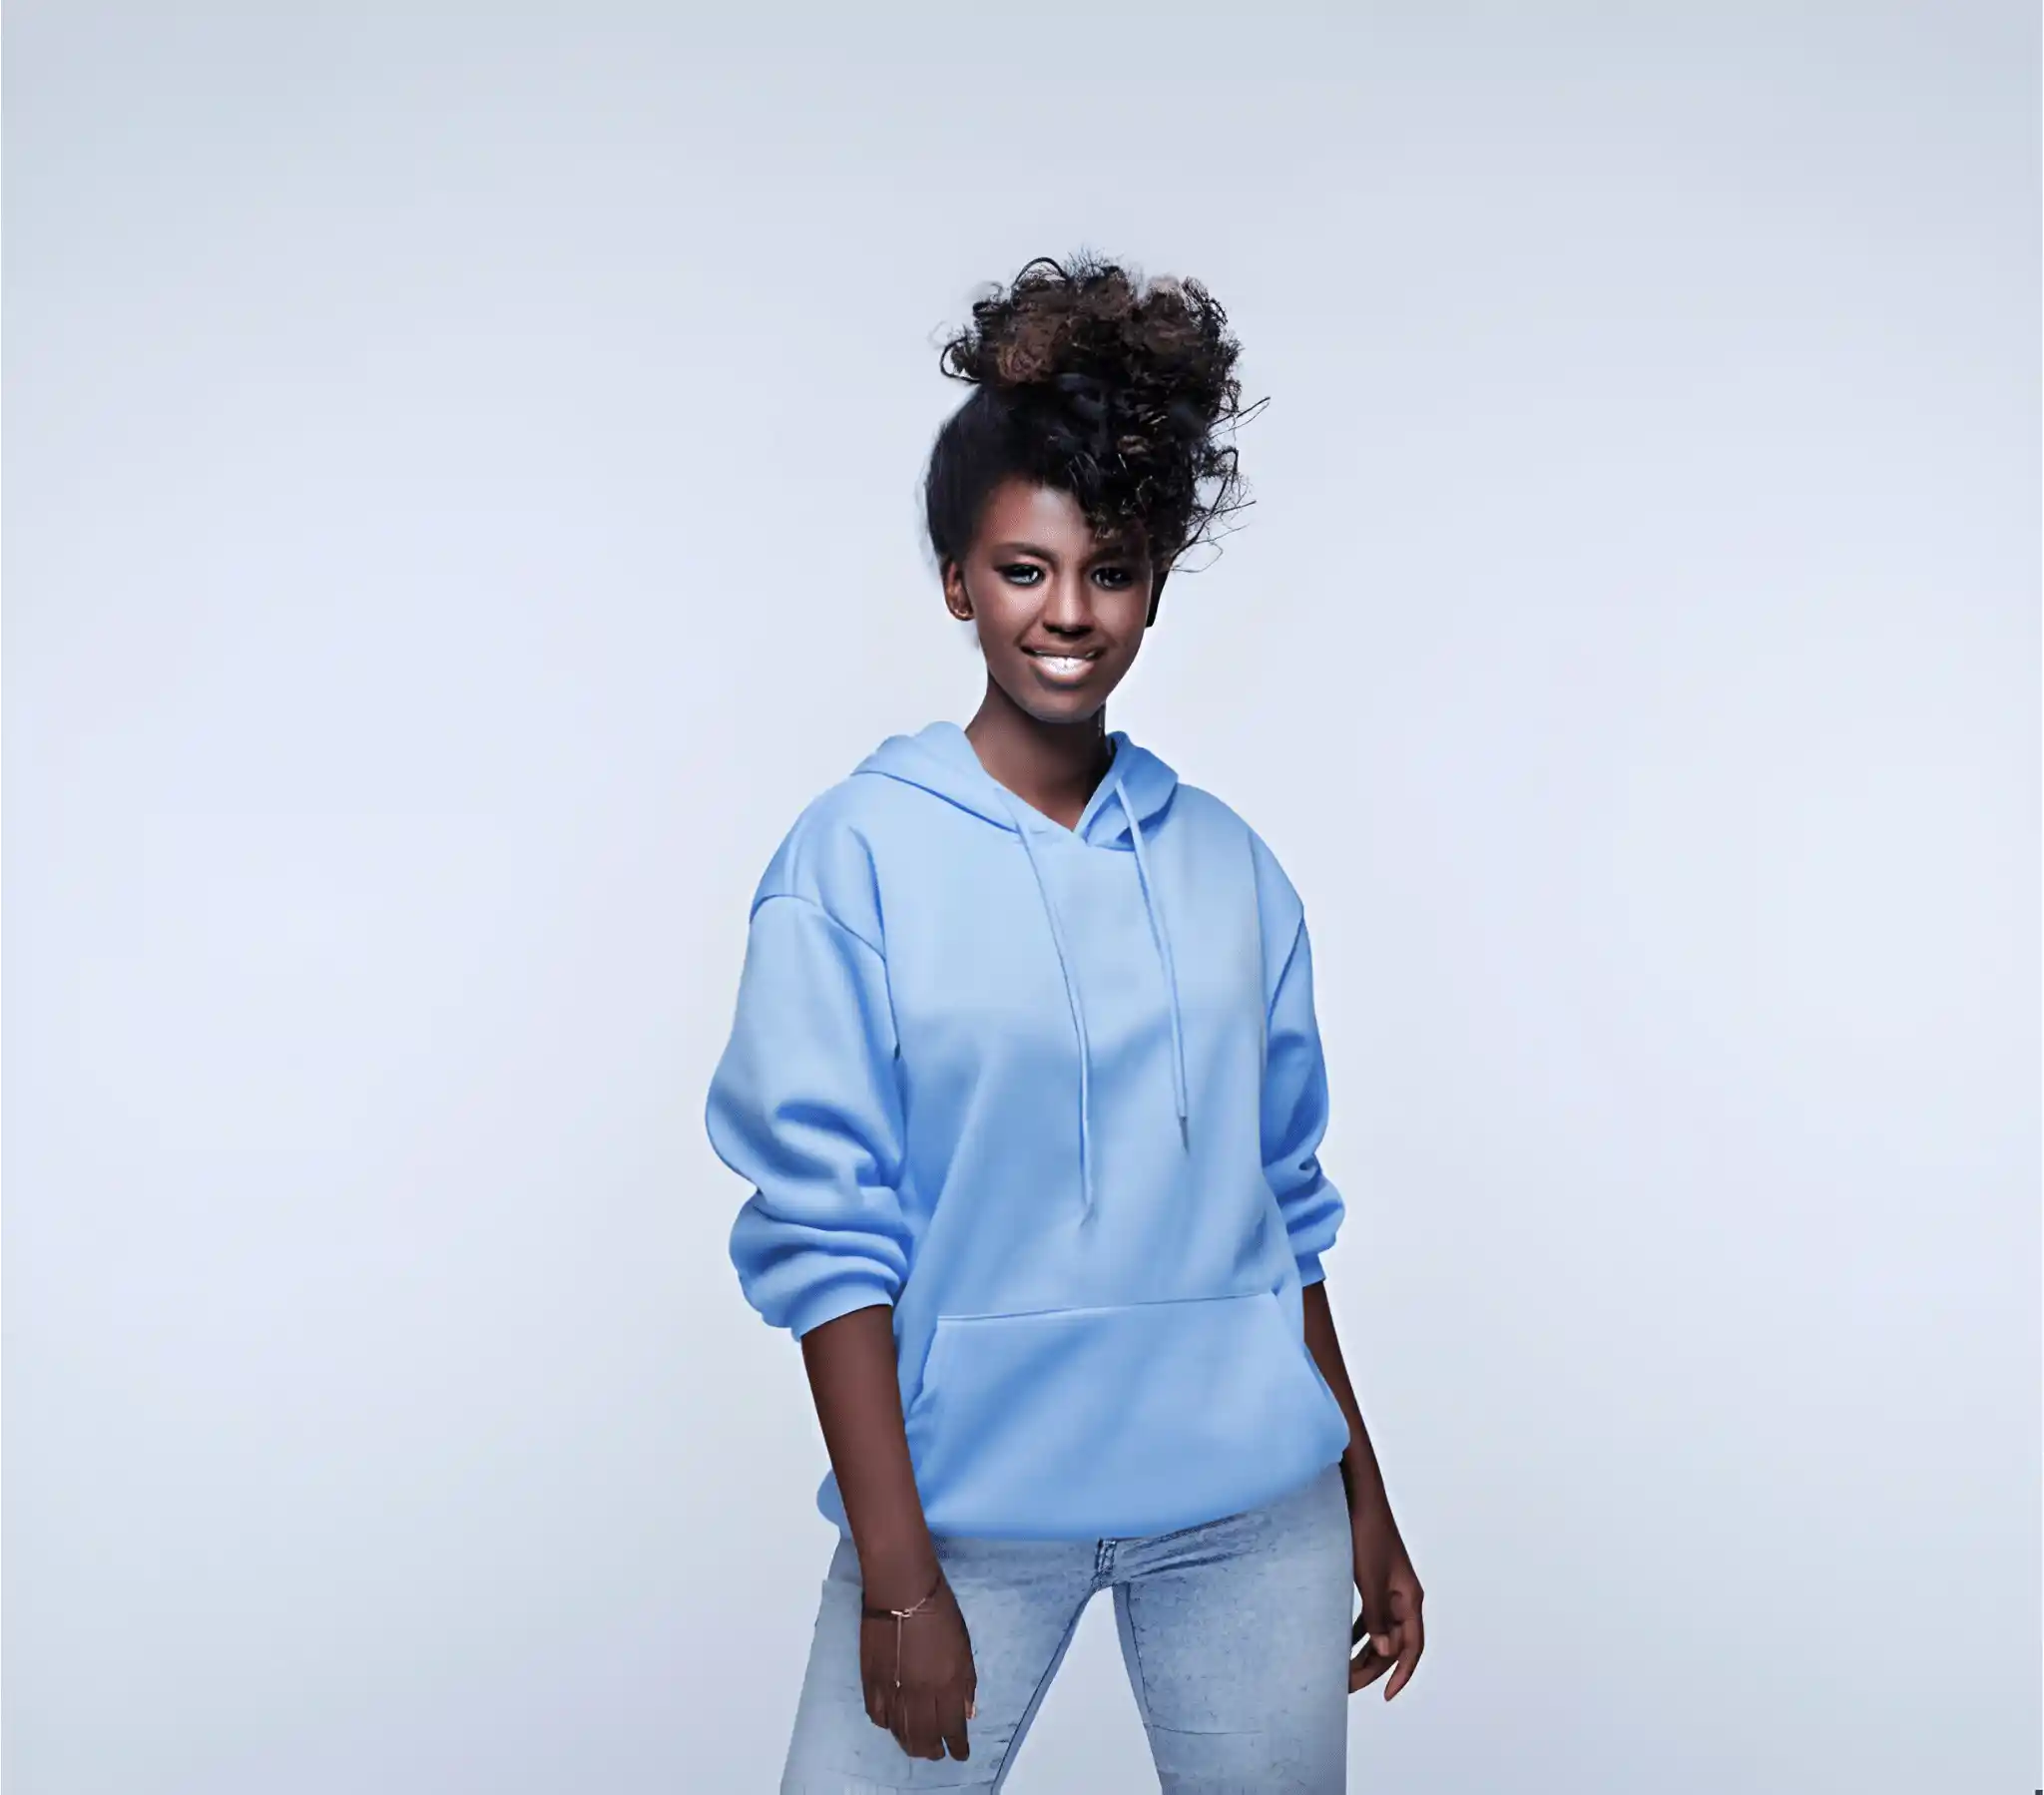 A black female model wearing a blue hooded outfit.